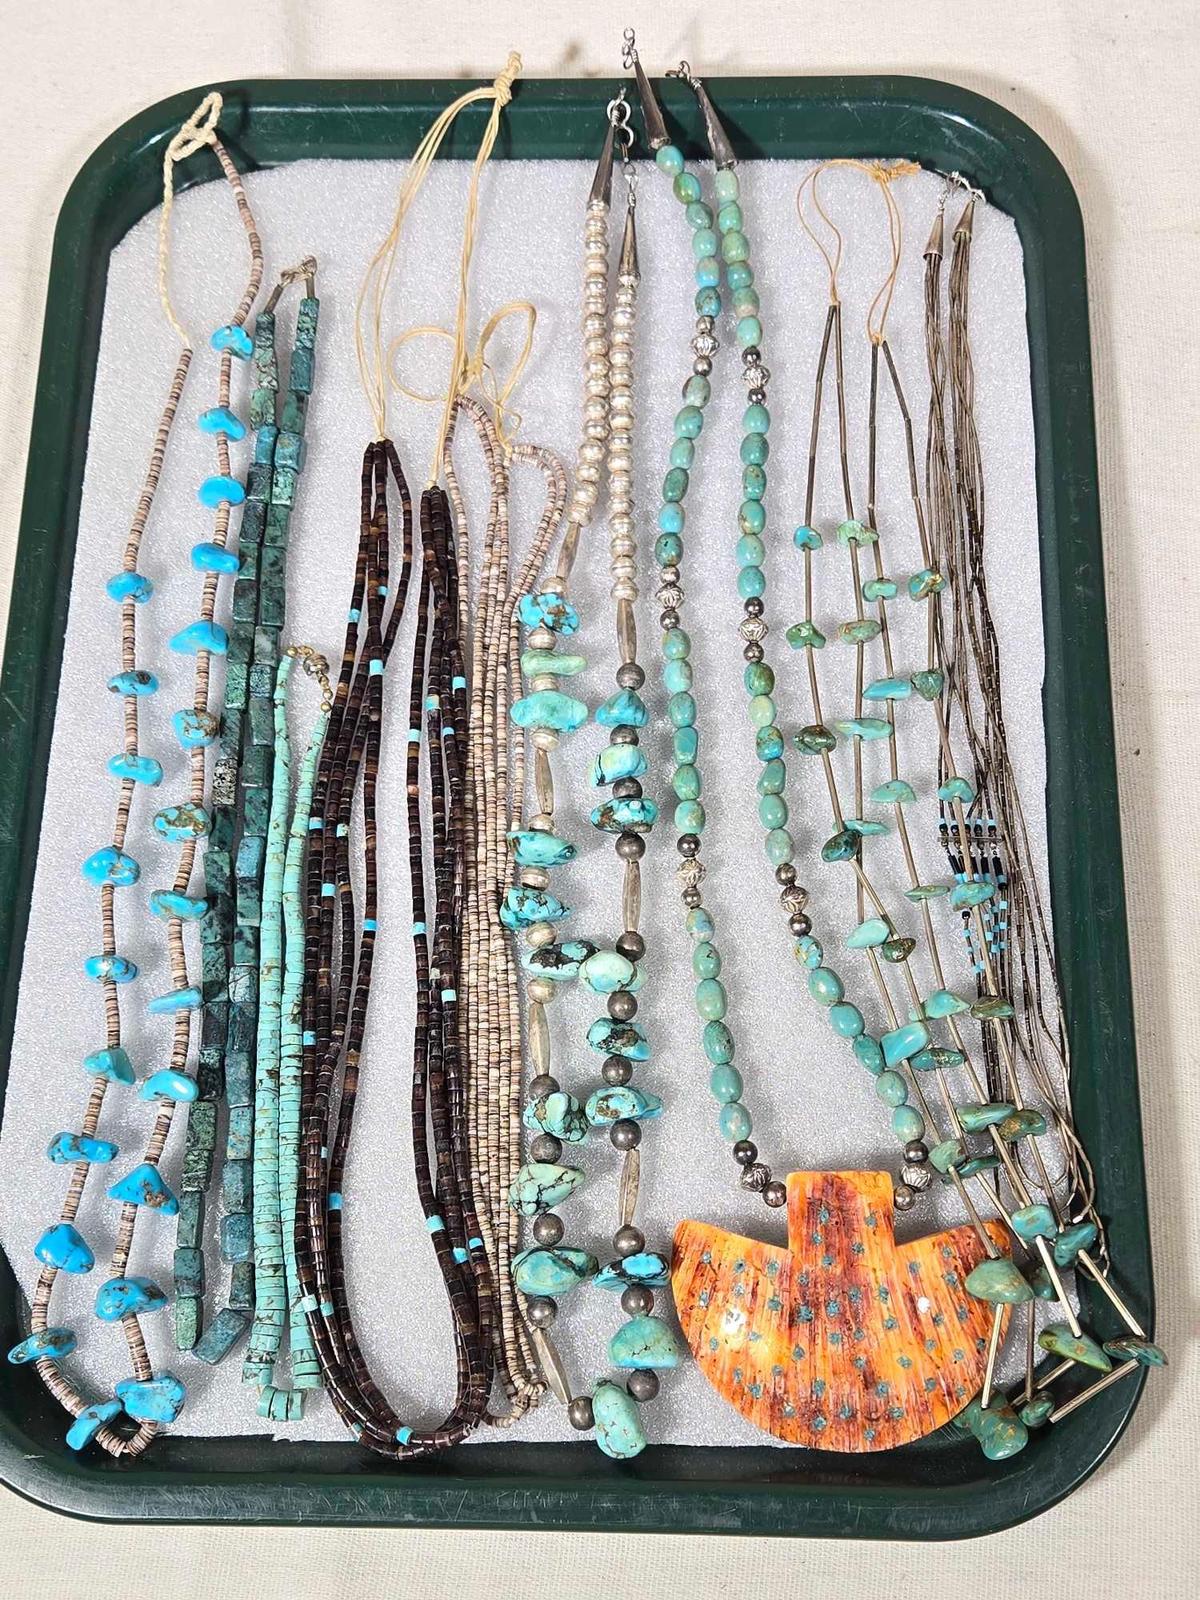 Native American Beaded Jewelry Incl. Turquoise & Sterling Silver